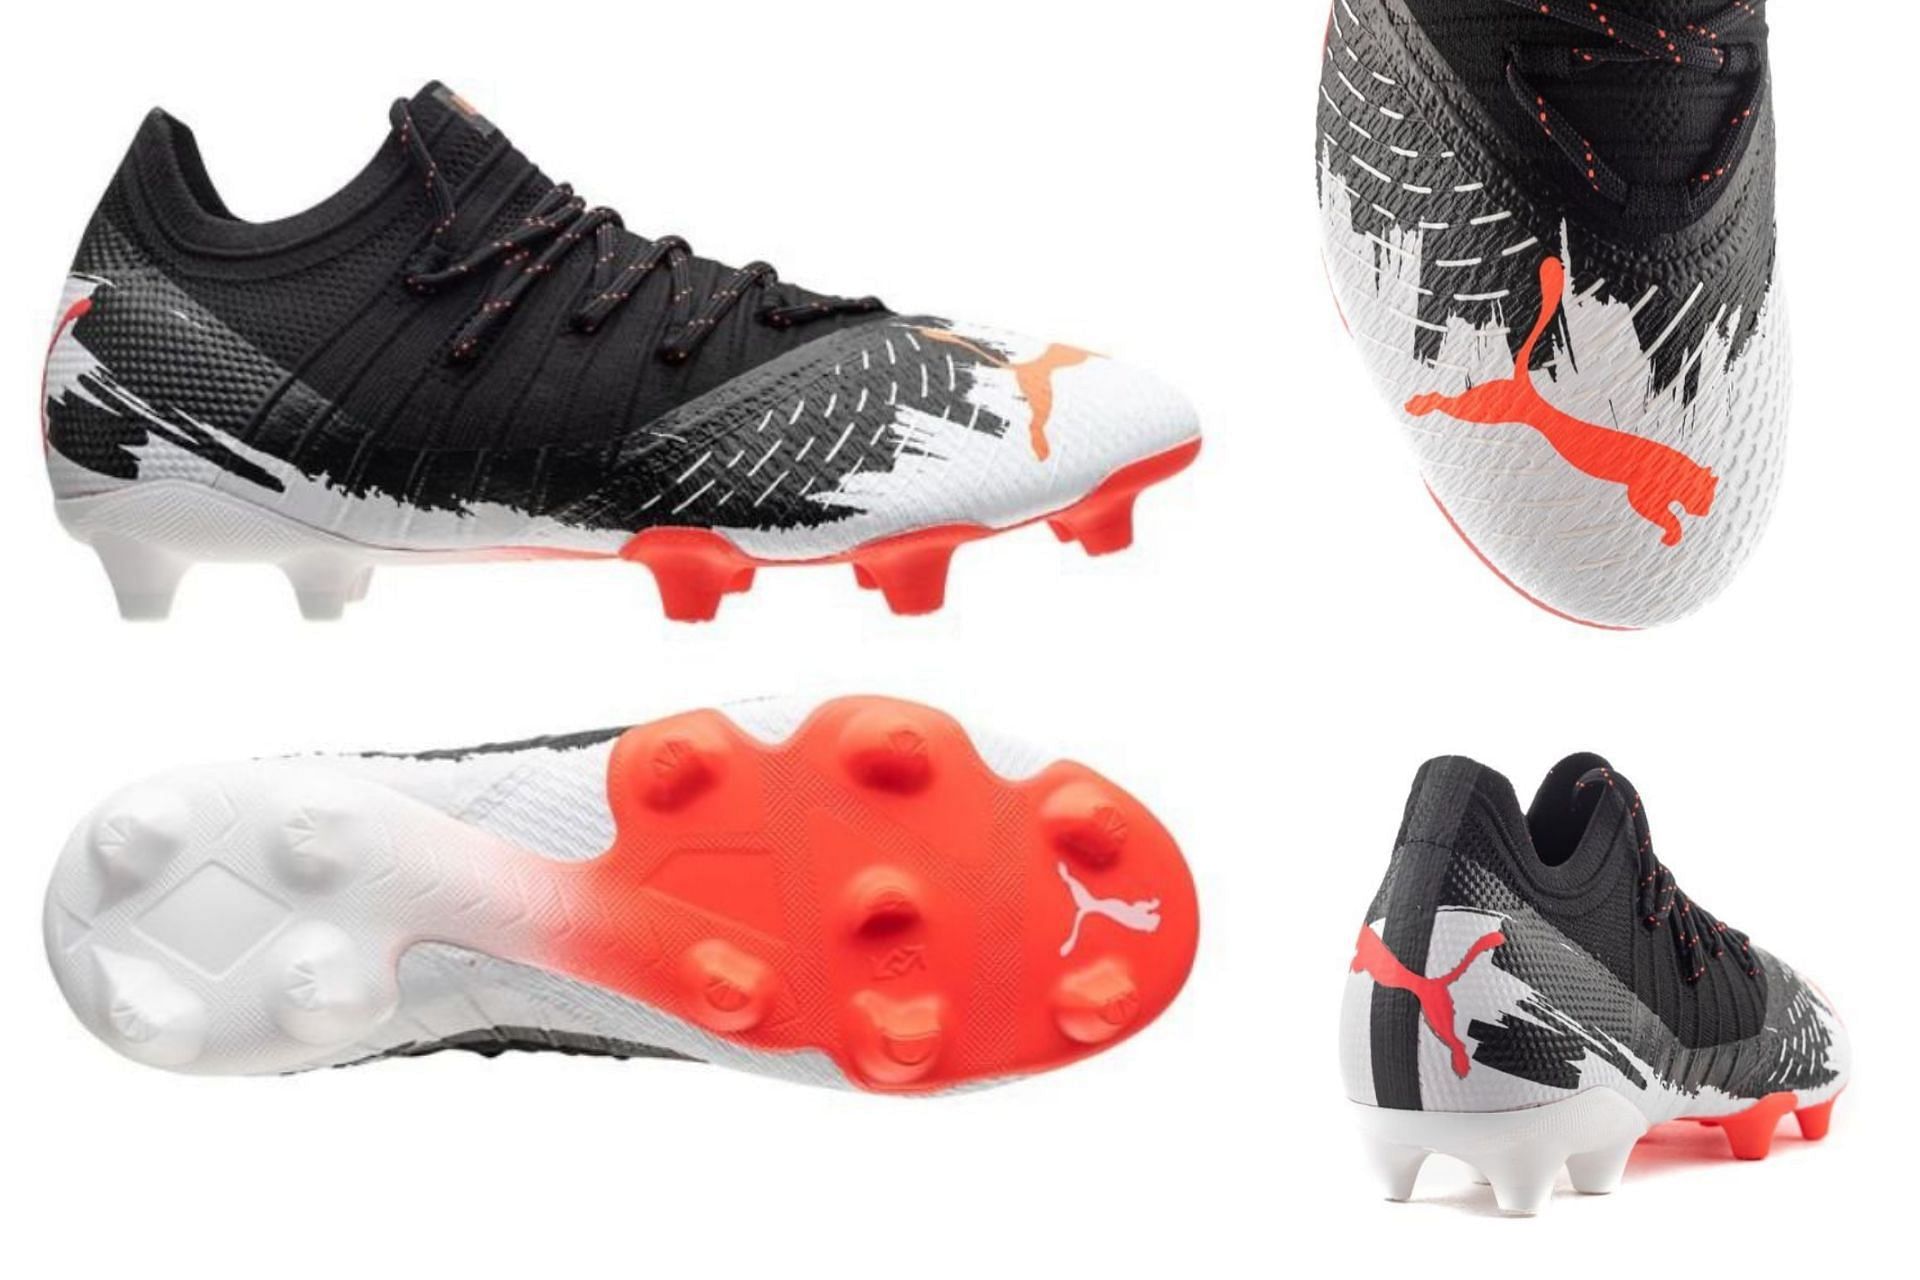 Take a closer look at the Future Z soccer cleats (Image via Sportskeeda)